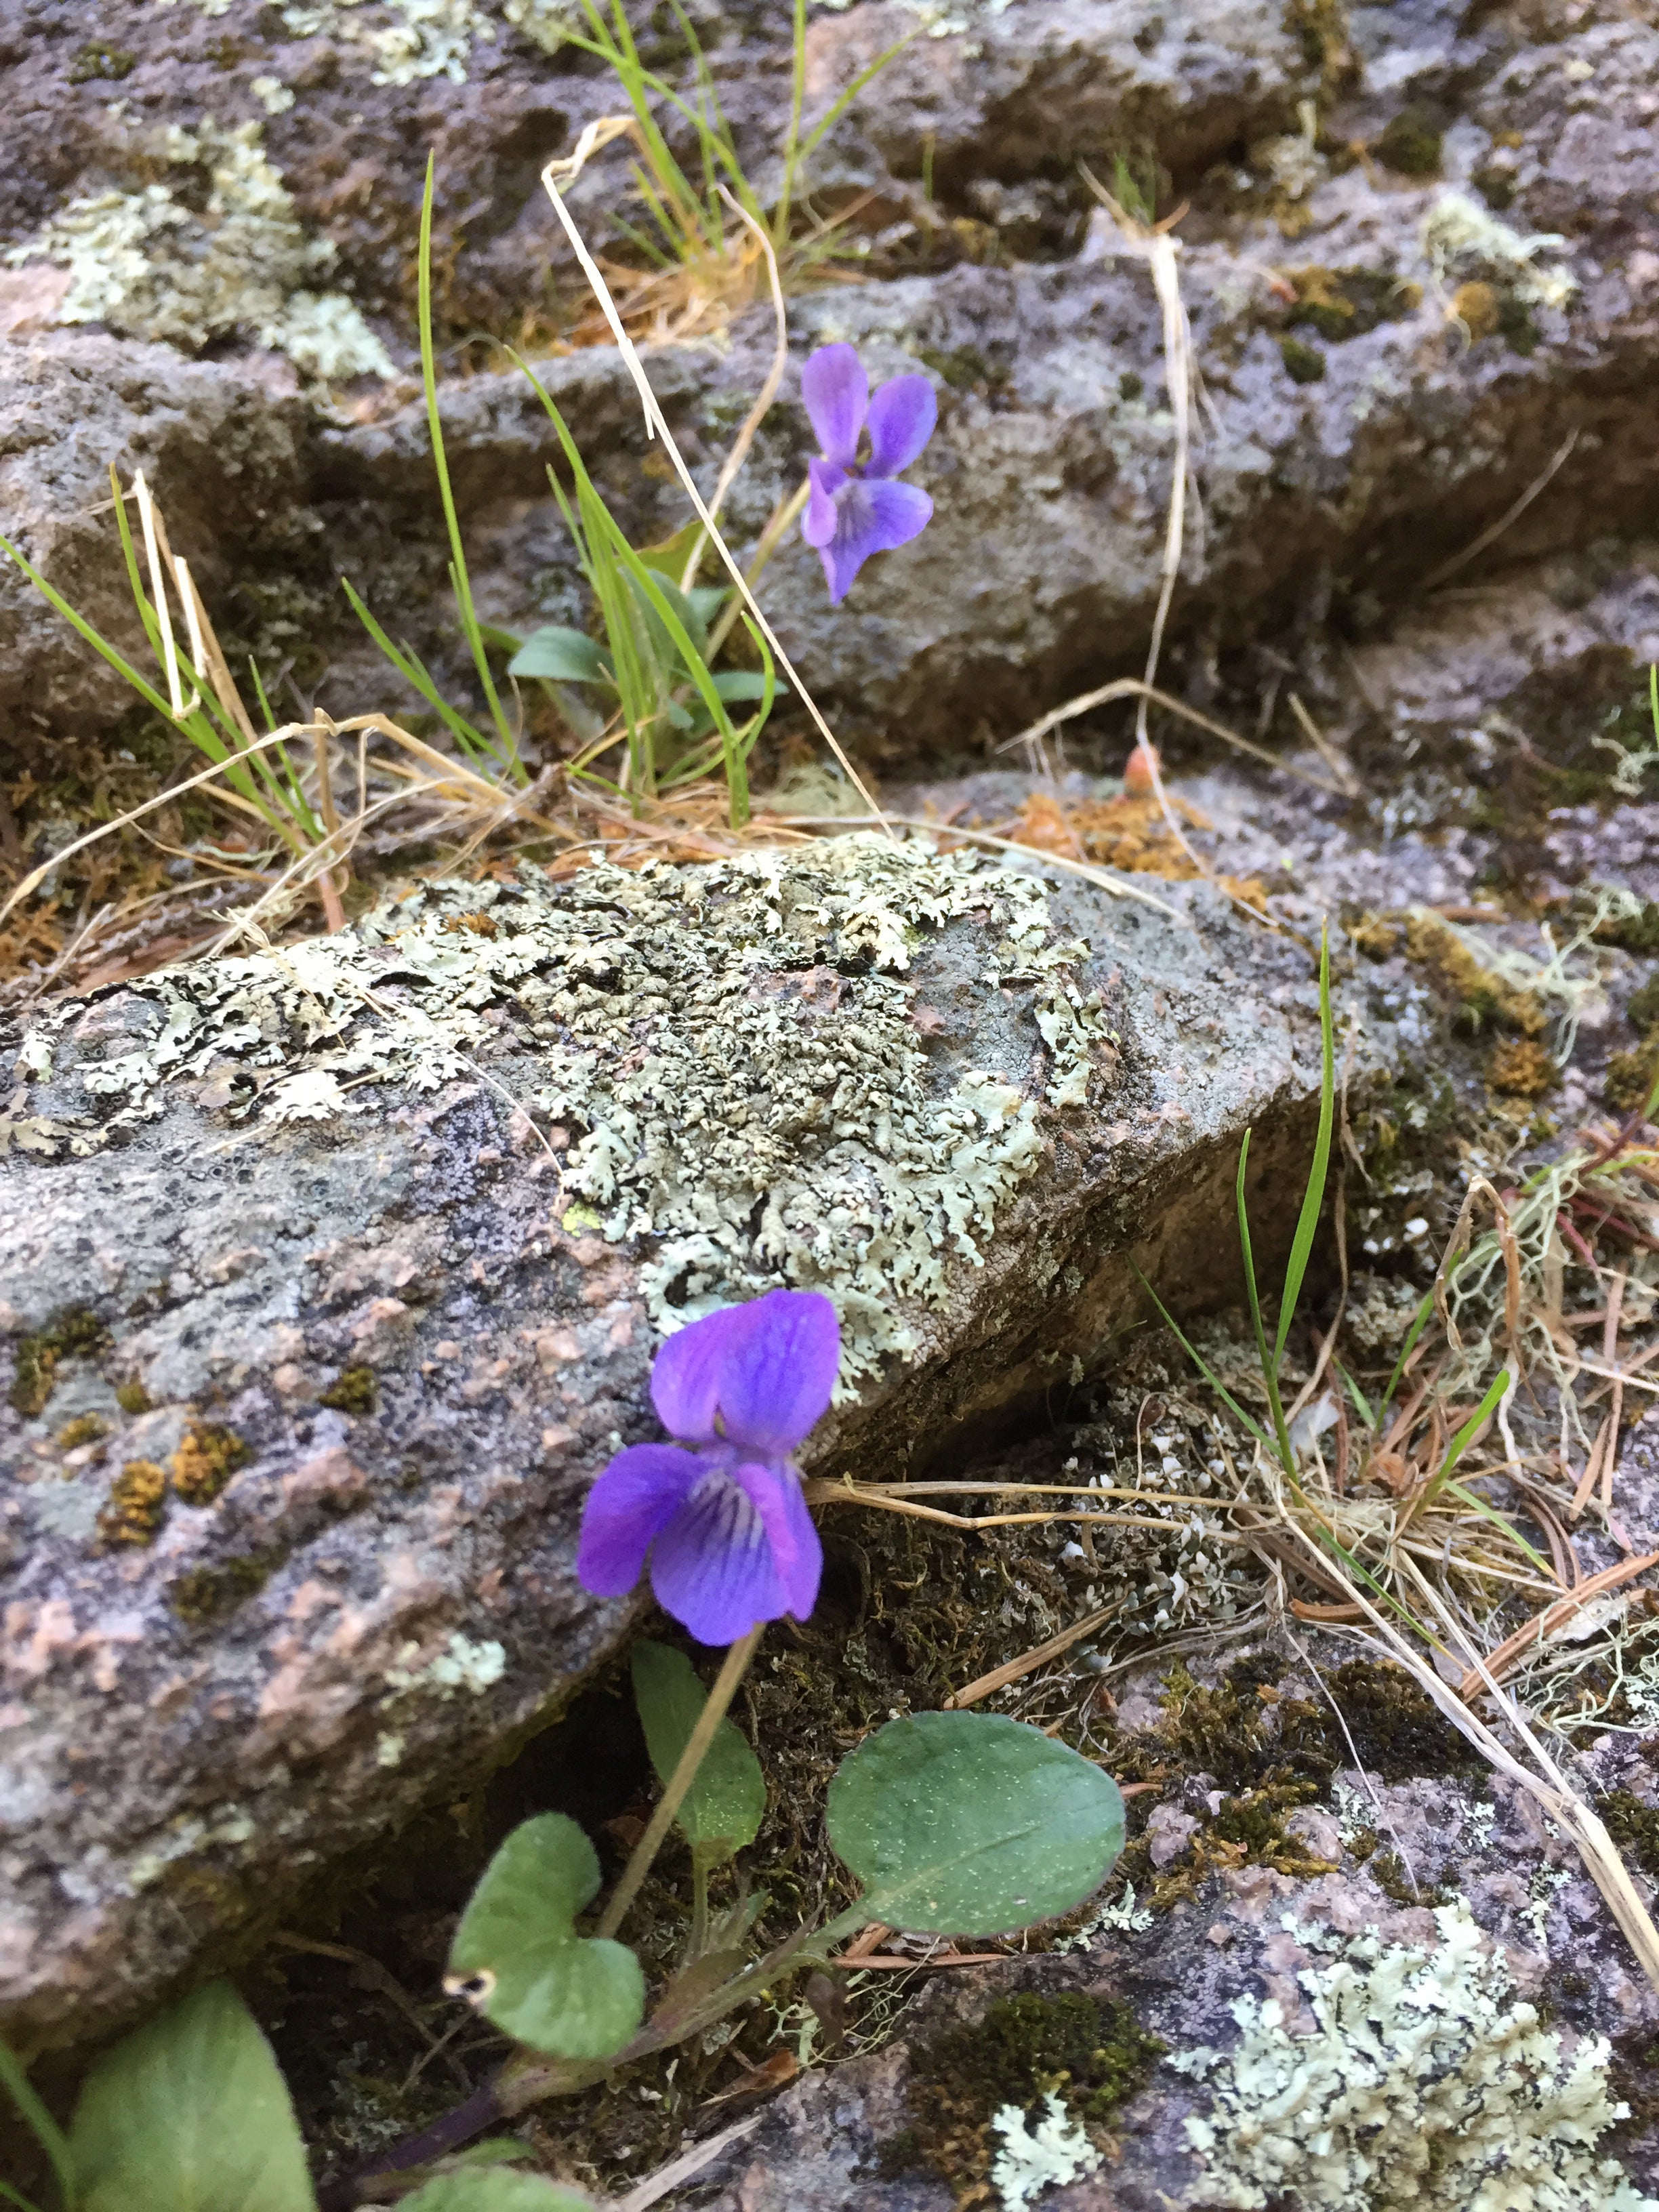 Young flowers from rock.